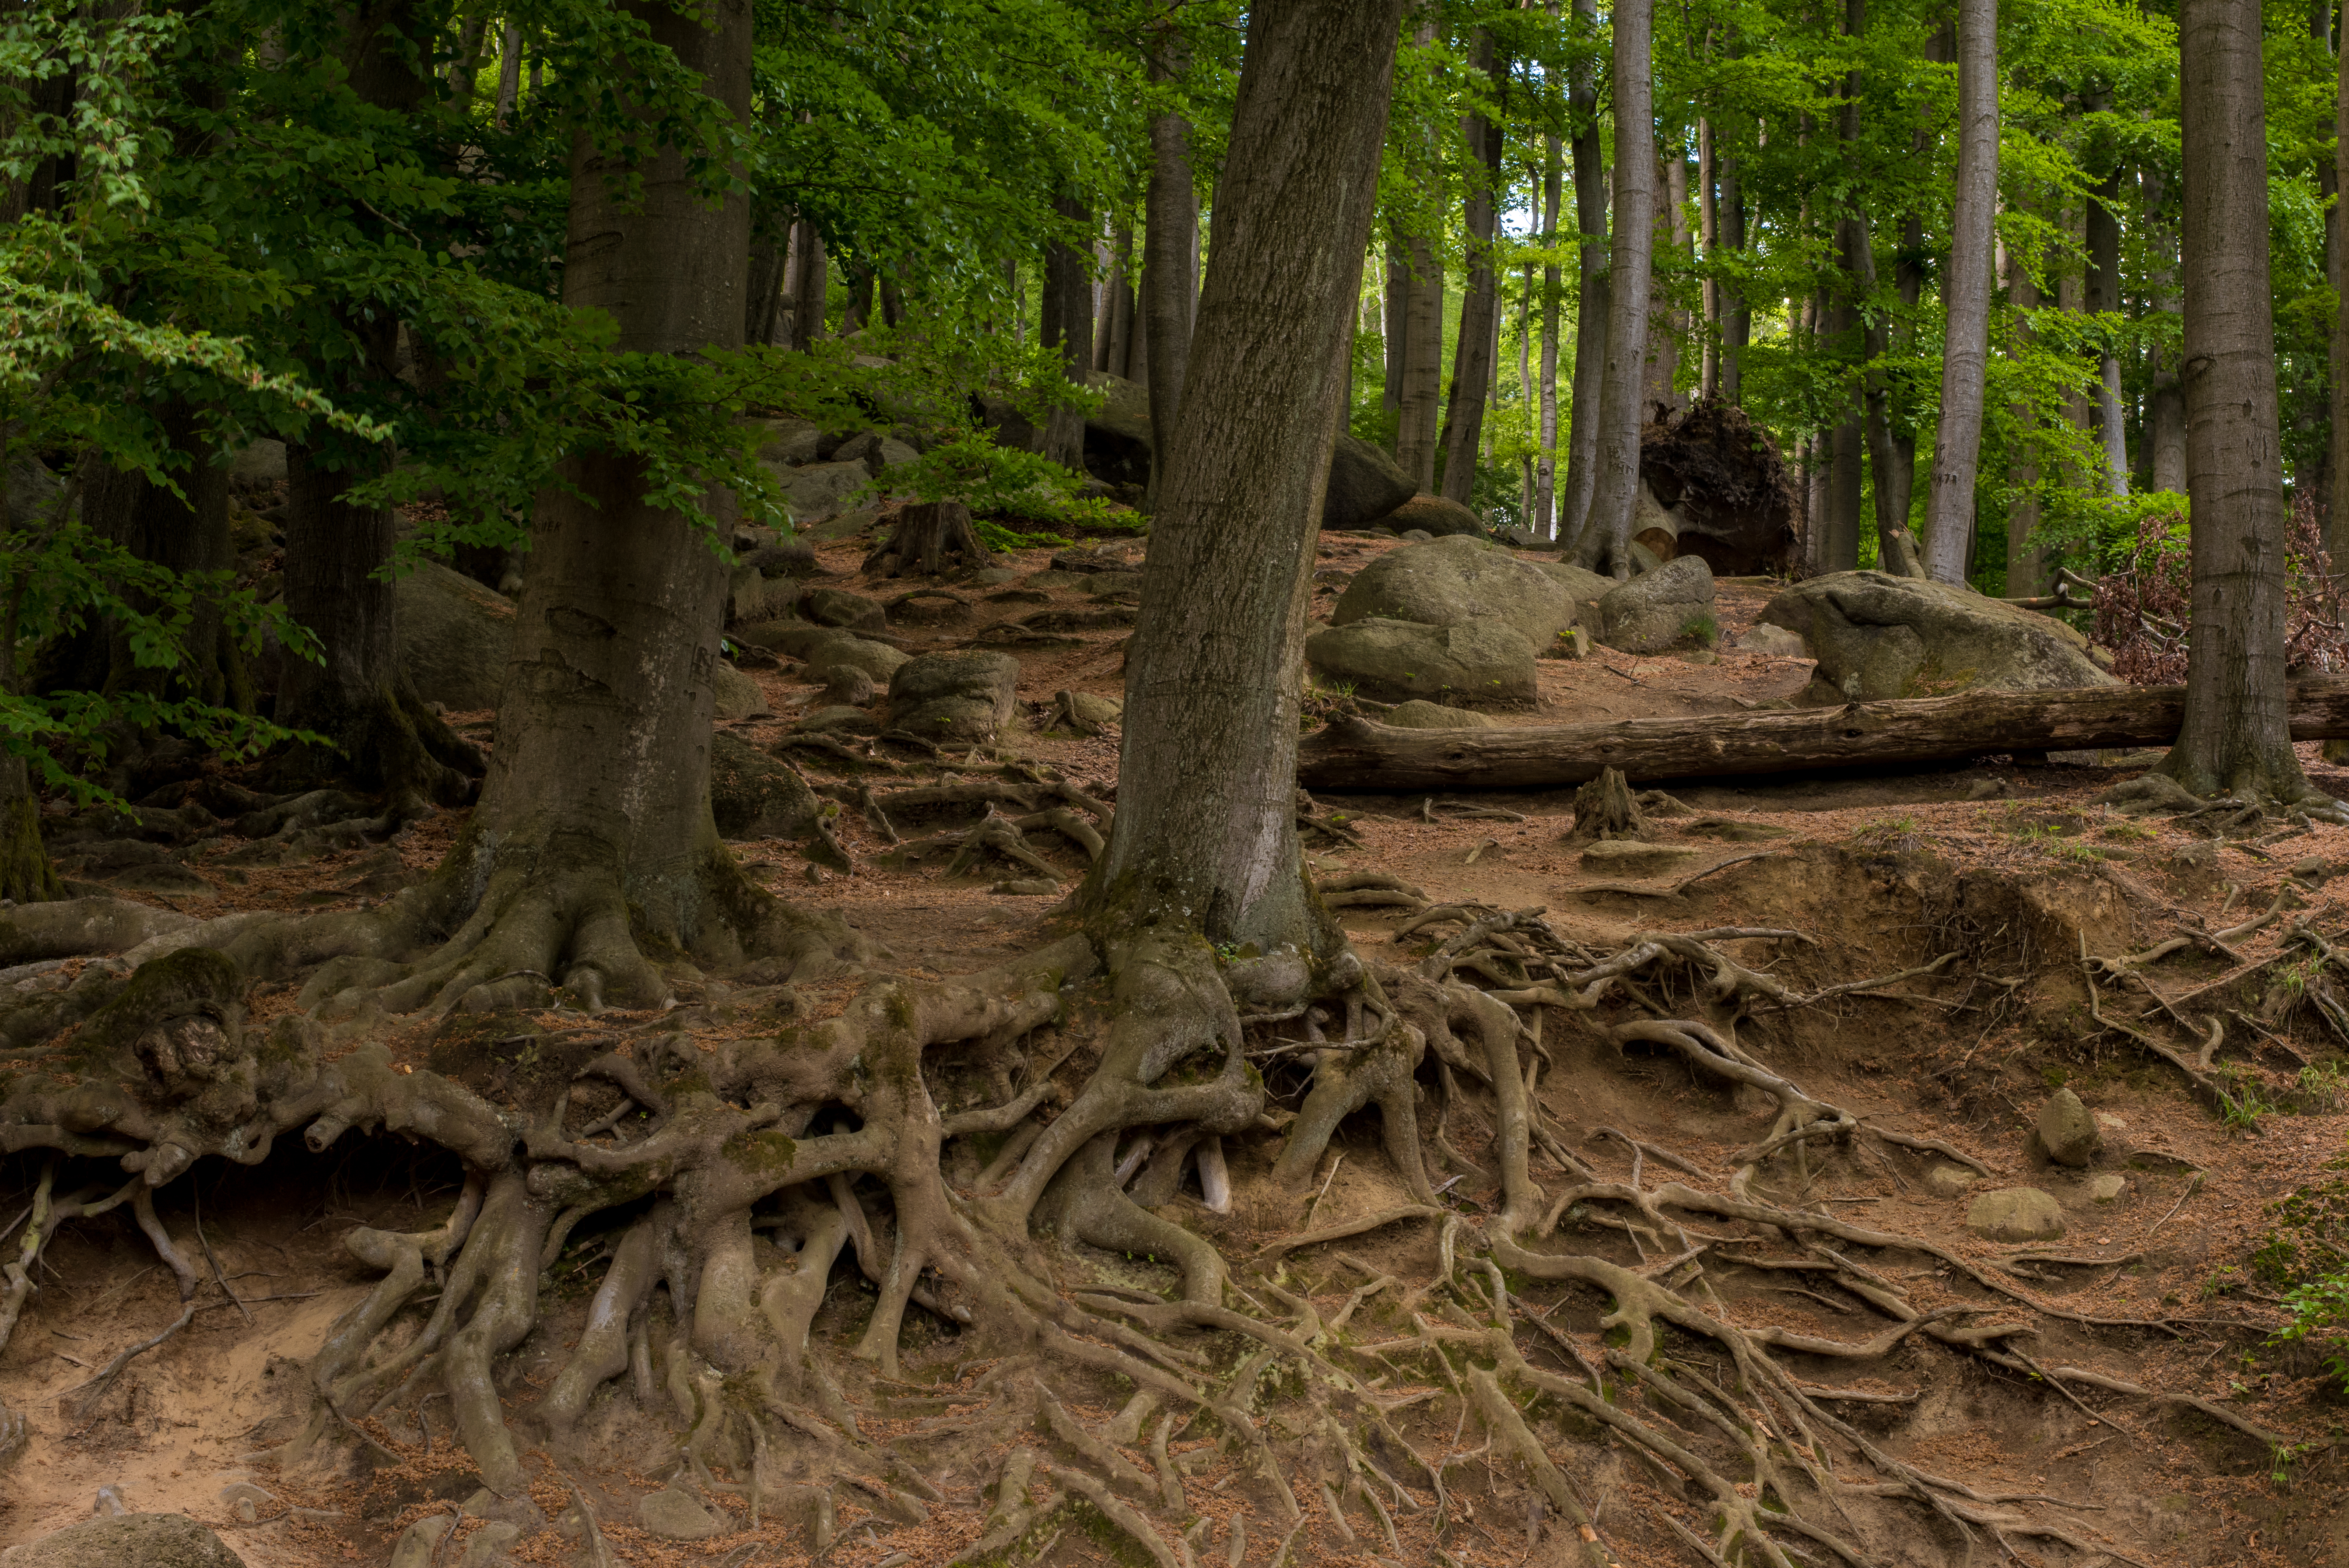 Tree roots above the ground at Felsenmeer in Lautertal, Odenwald, Germany; part of "Felsberg bei Reichenbach" nature reserve.  Denis Zastanceanu. CC BY-SA 4.0 (https://creativecommons.org/licenses/by-sa/4.0).